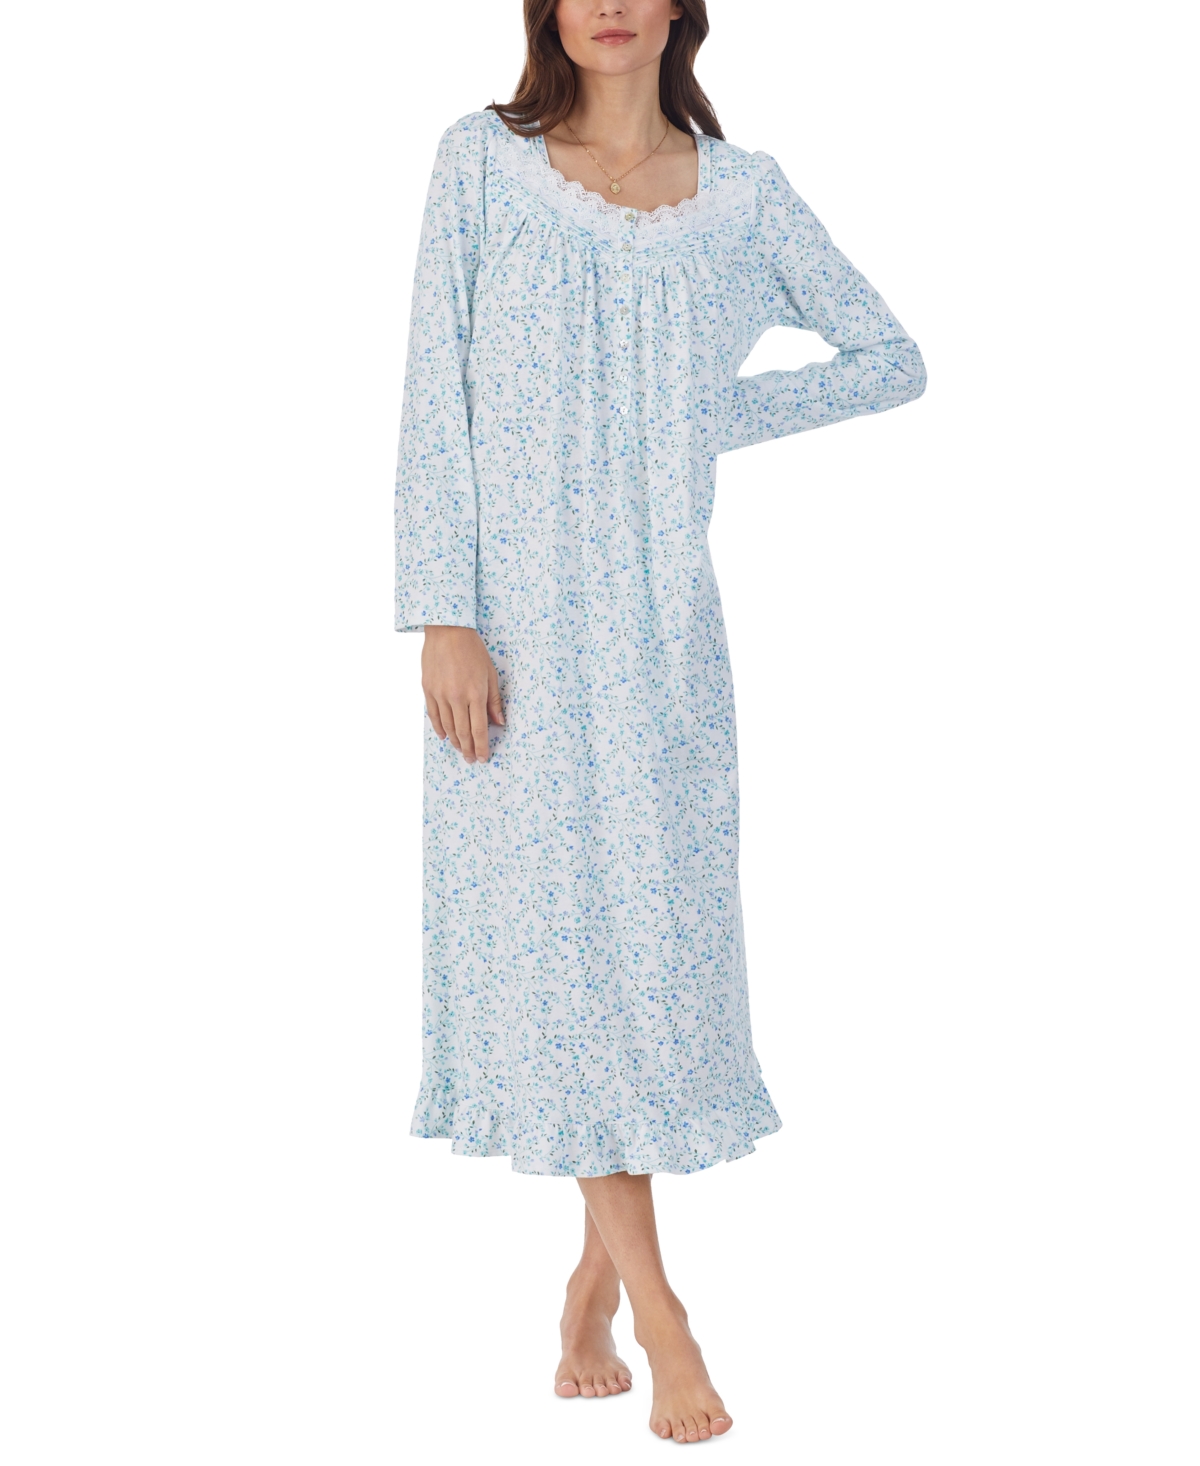 Women's Cotton Floral Lace-Trim Nightgown - White Ditsy